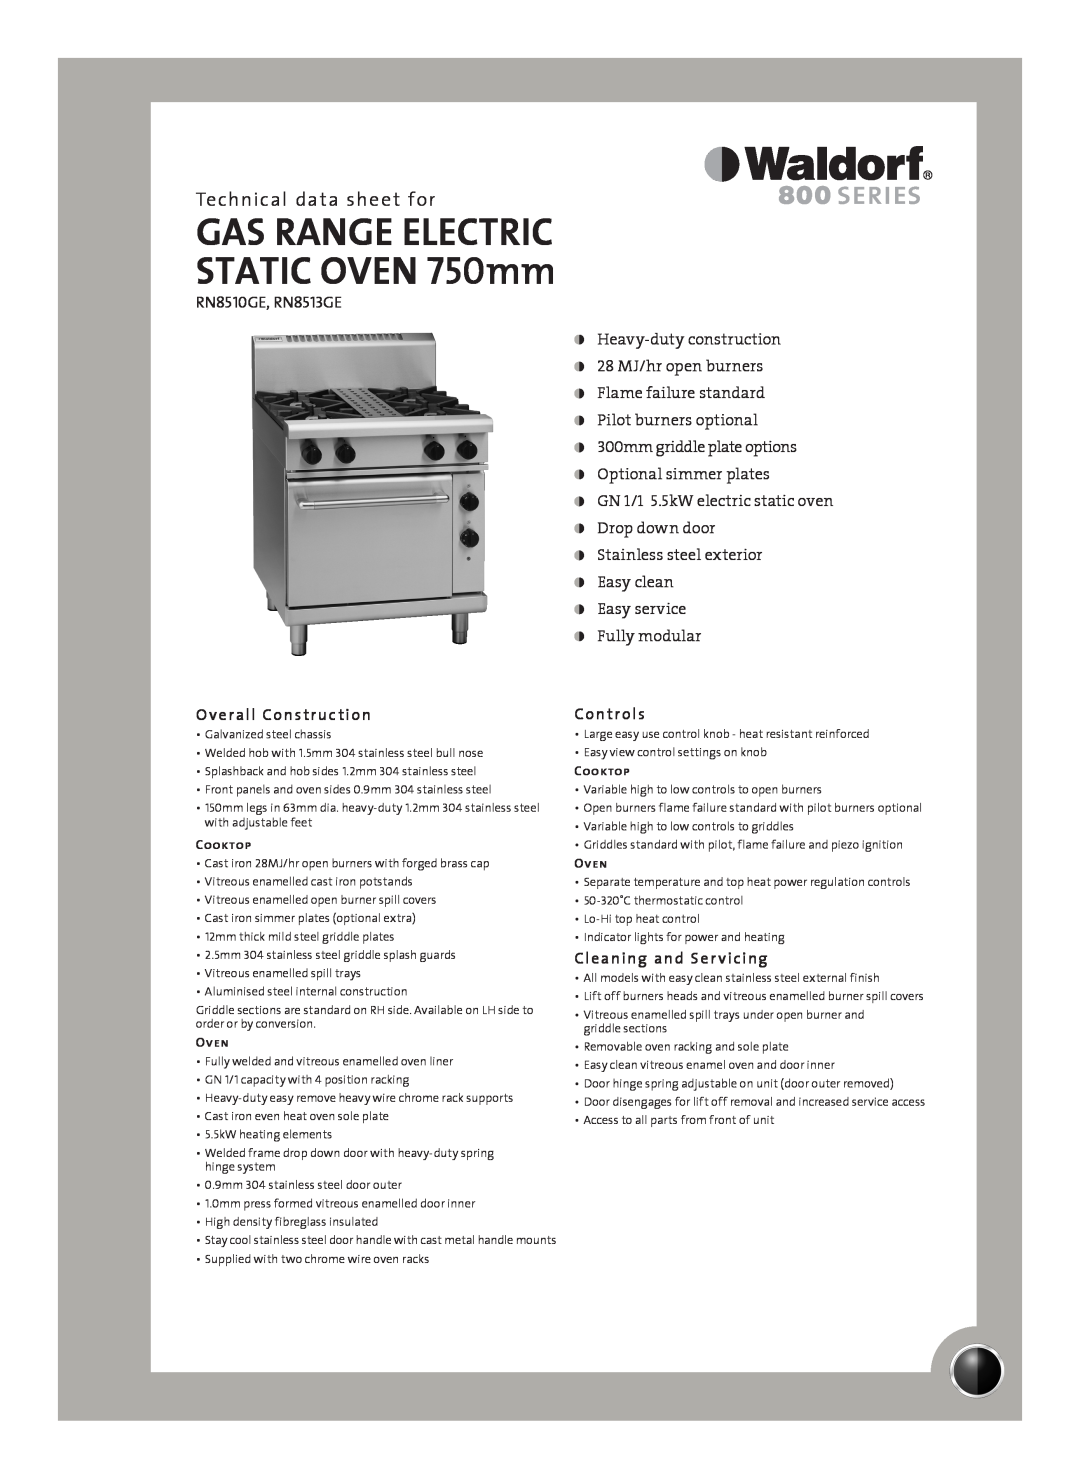 Moffat RN8513GE manual Technical data sheet for, Overall Construction, Controls, Cleaning and Ser vicing, Cooktop, Oven 